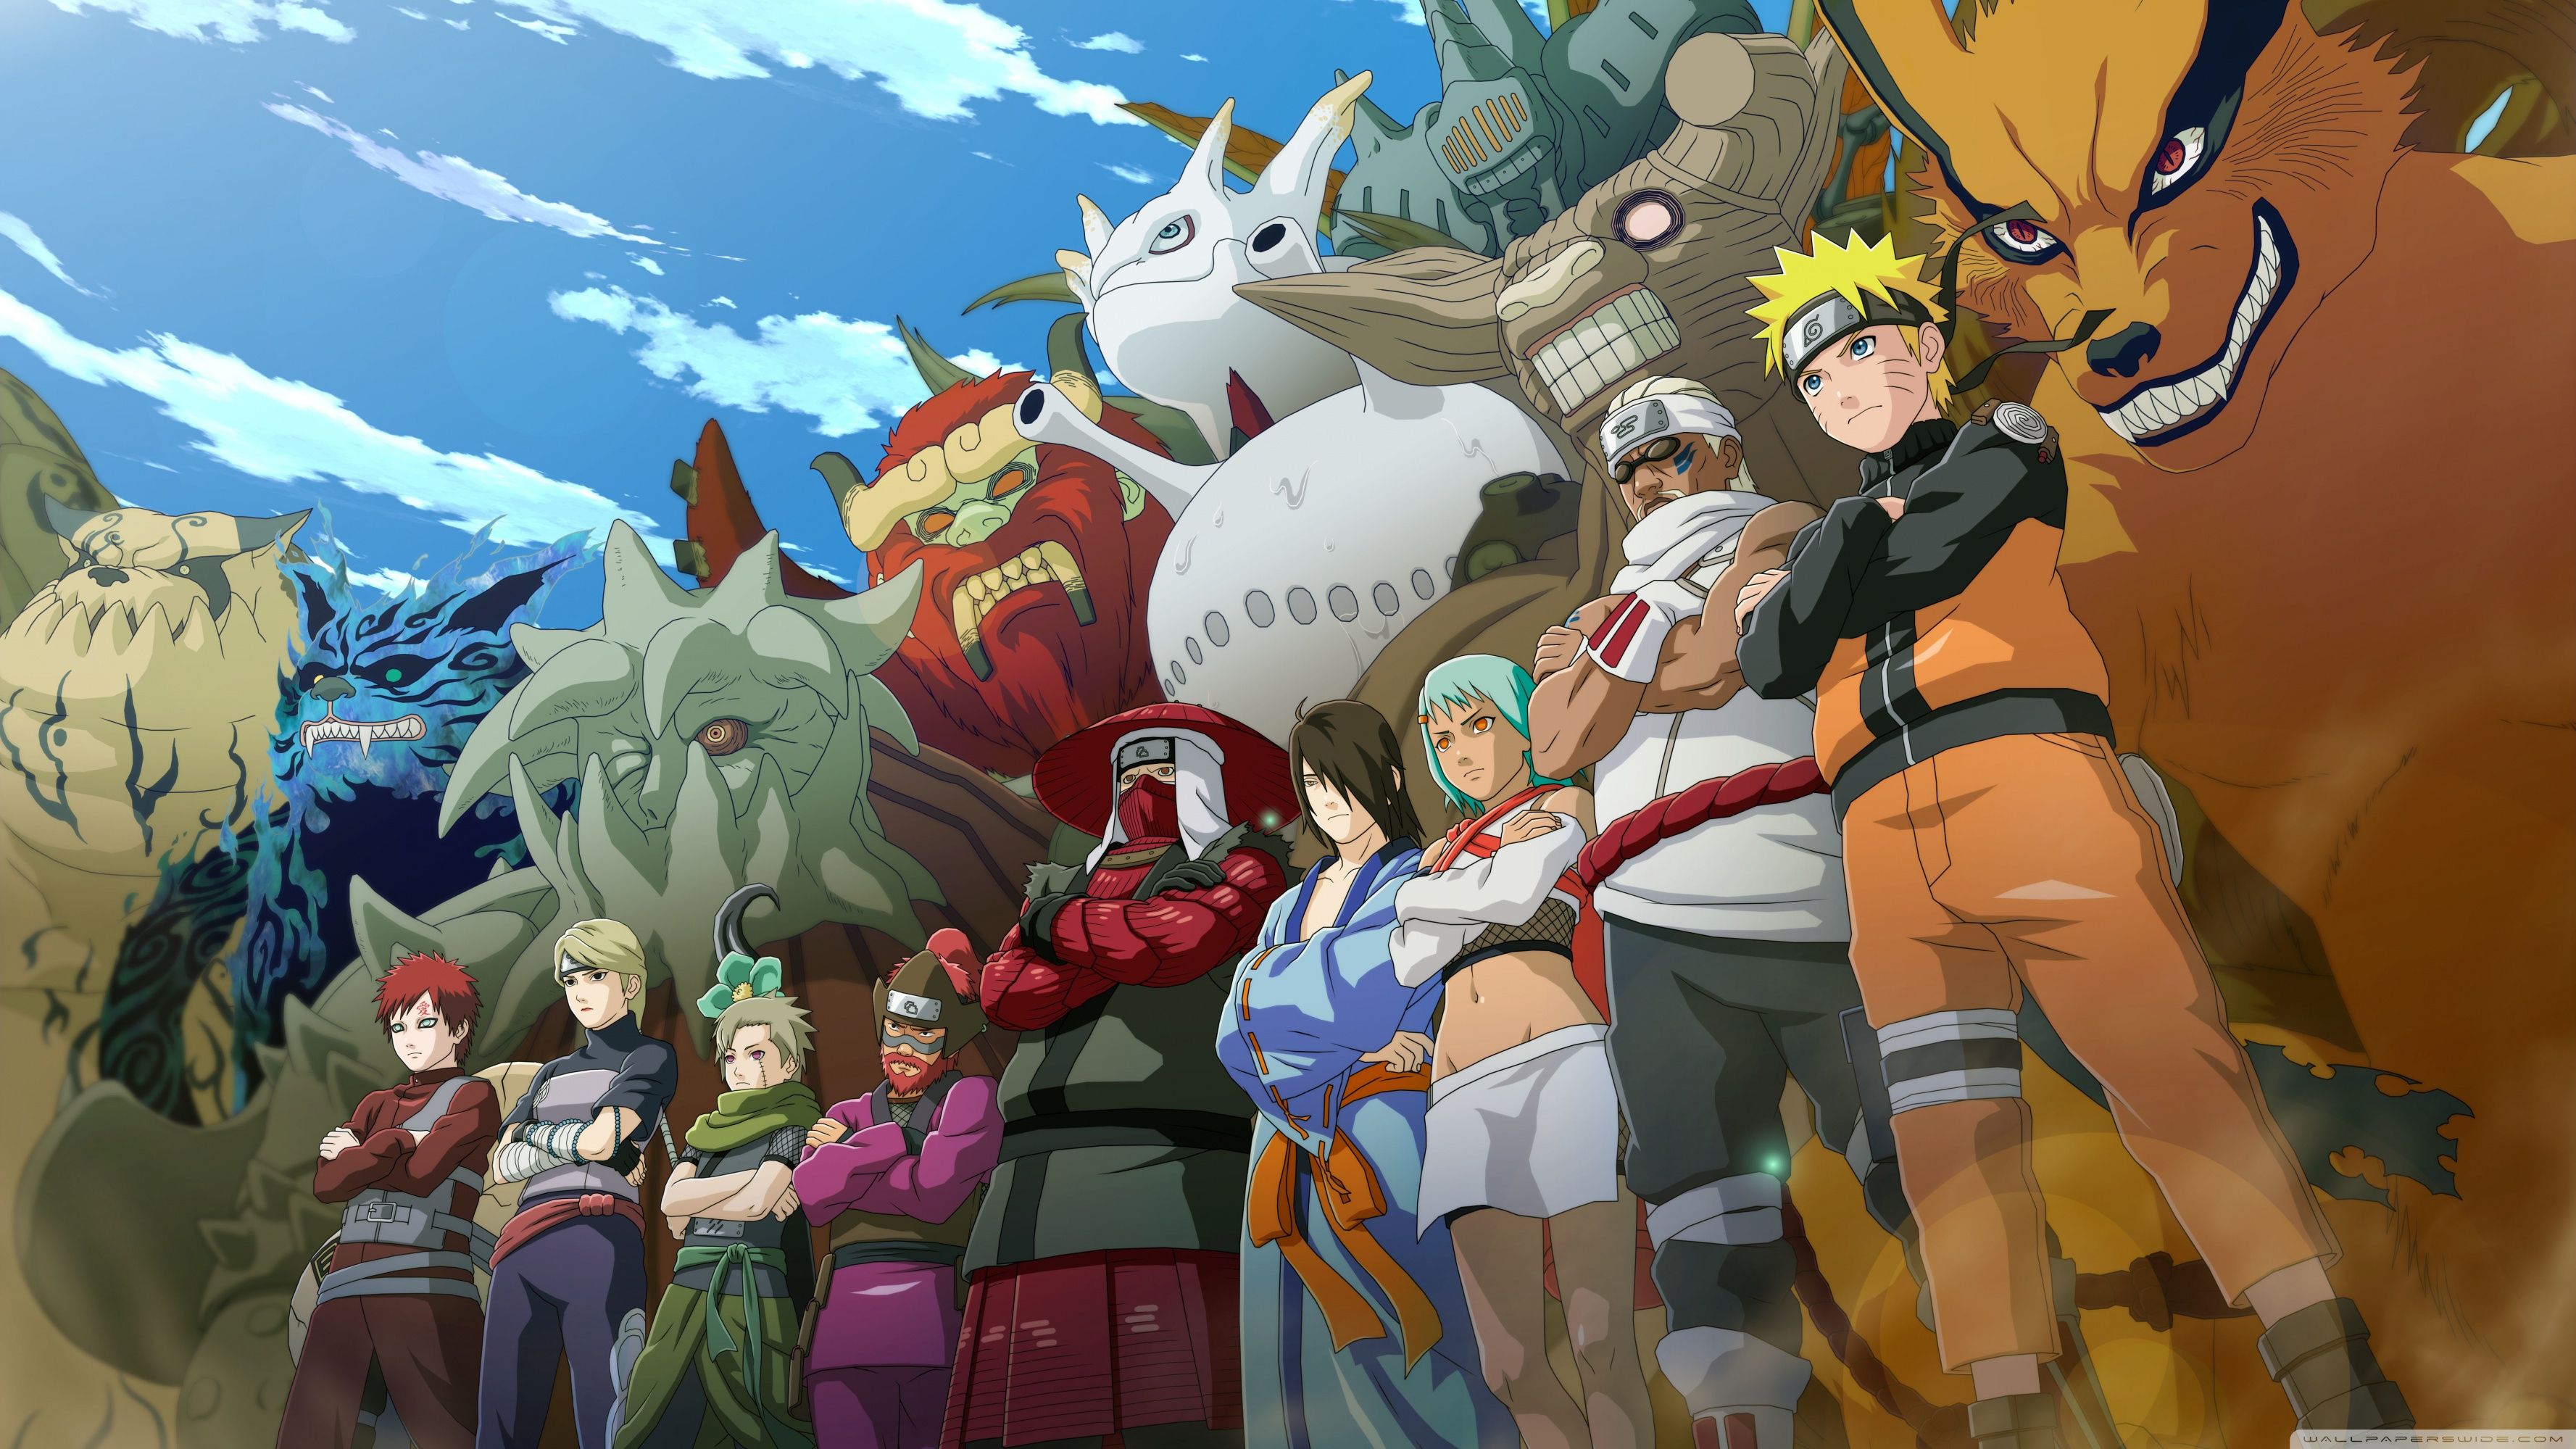 View and Download high-resolution Naruto Shippuden for free. The